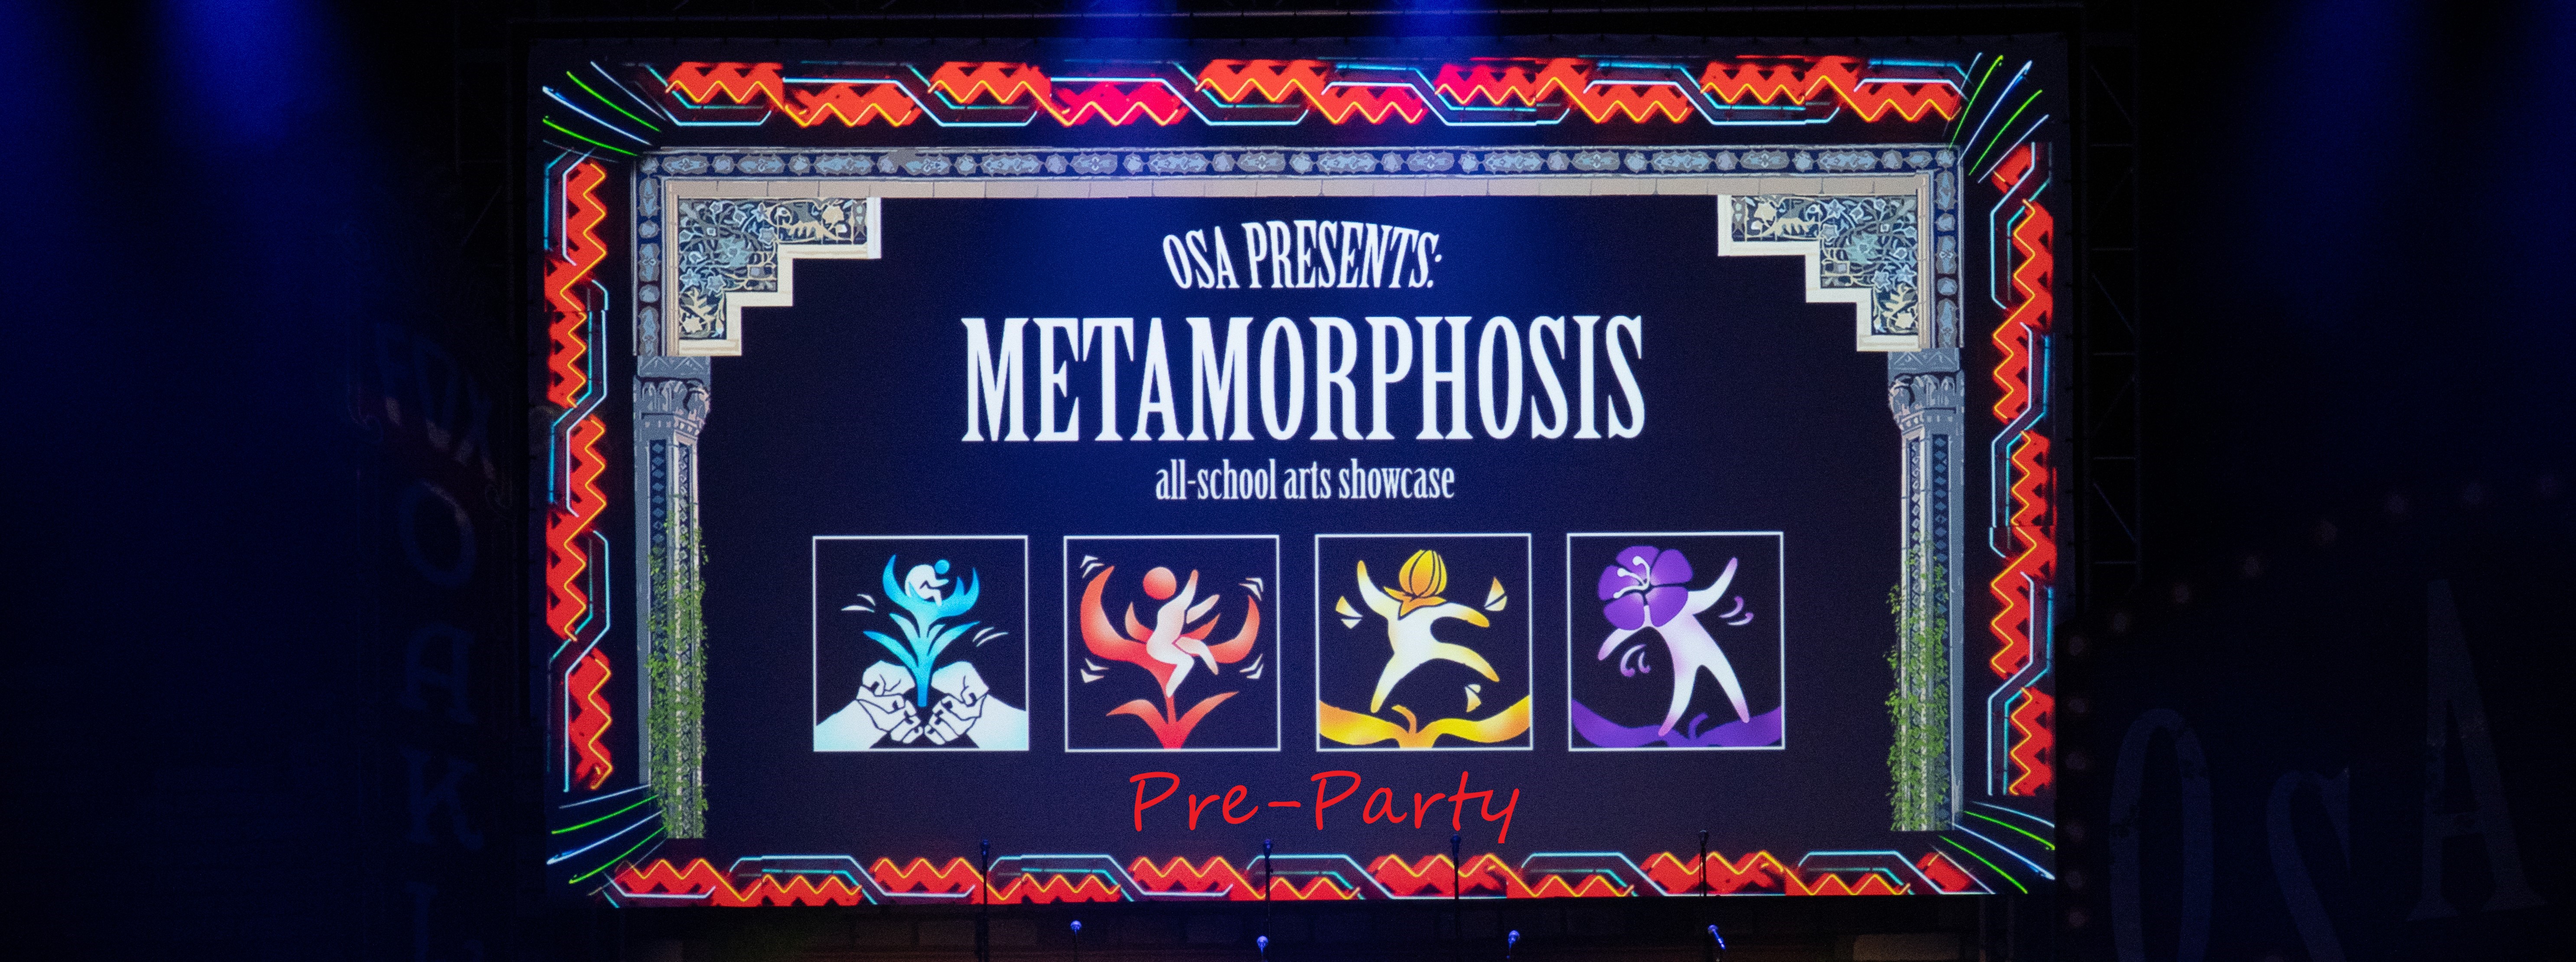 Marquis at the Fox Theater for Metamorphosis Show April 29